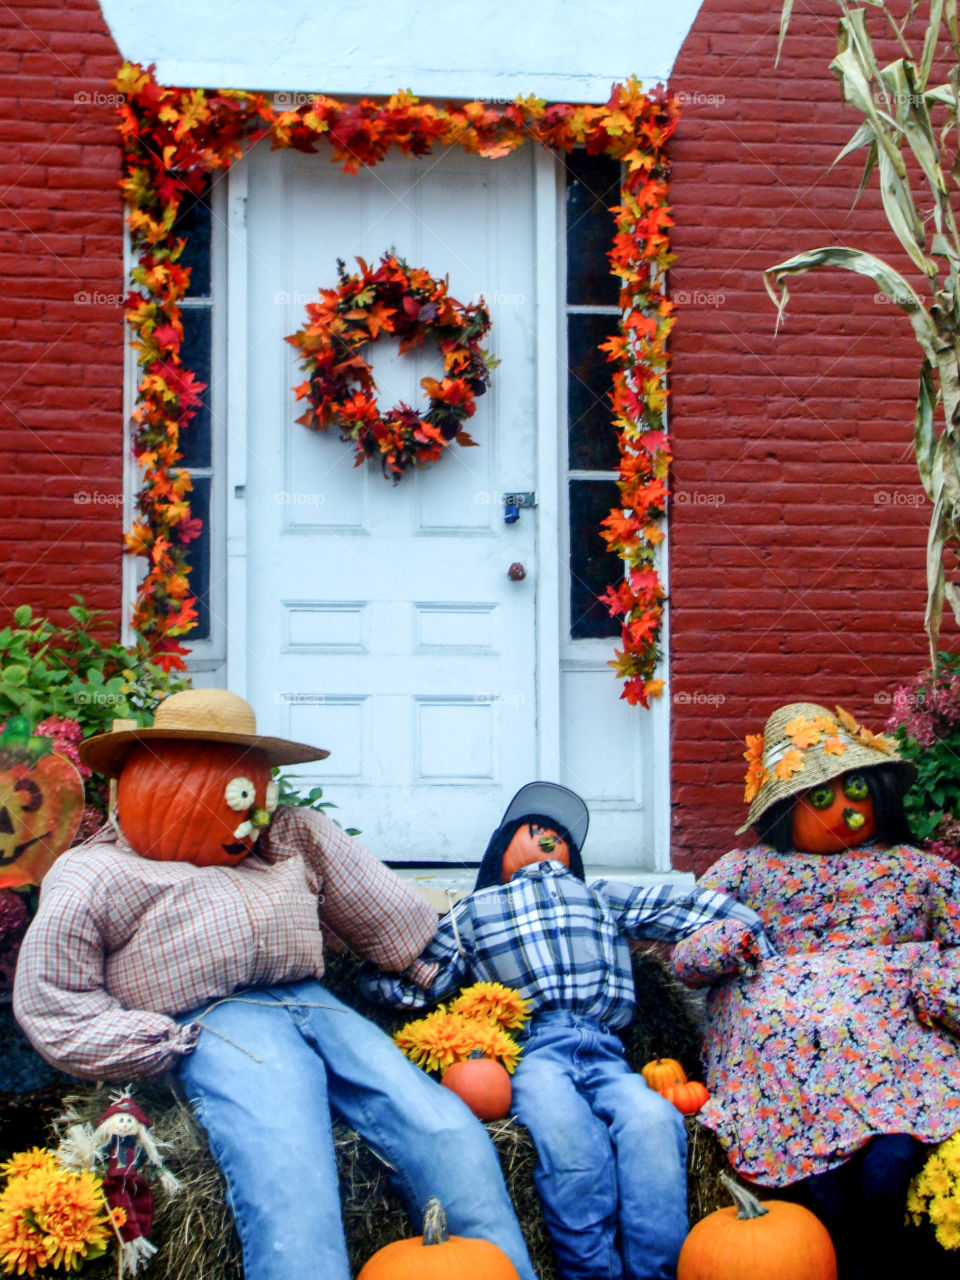 A joyful Fall display complete with colorful leaf garlands and Pumpkin People add to the Autumn festivities in the quaint village of Stowe, Vermont.